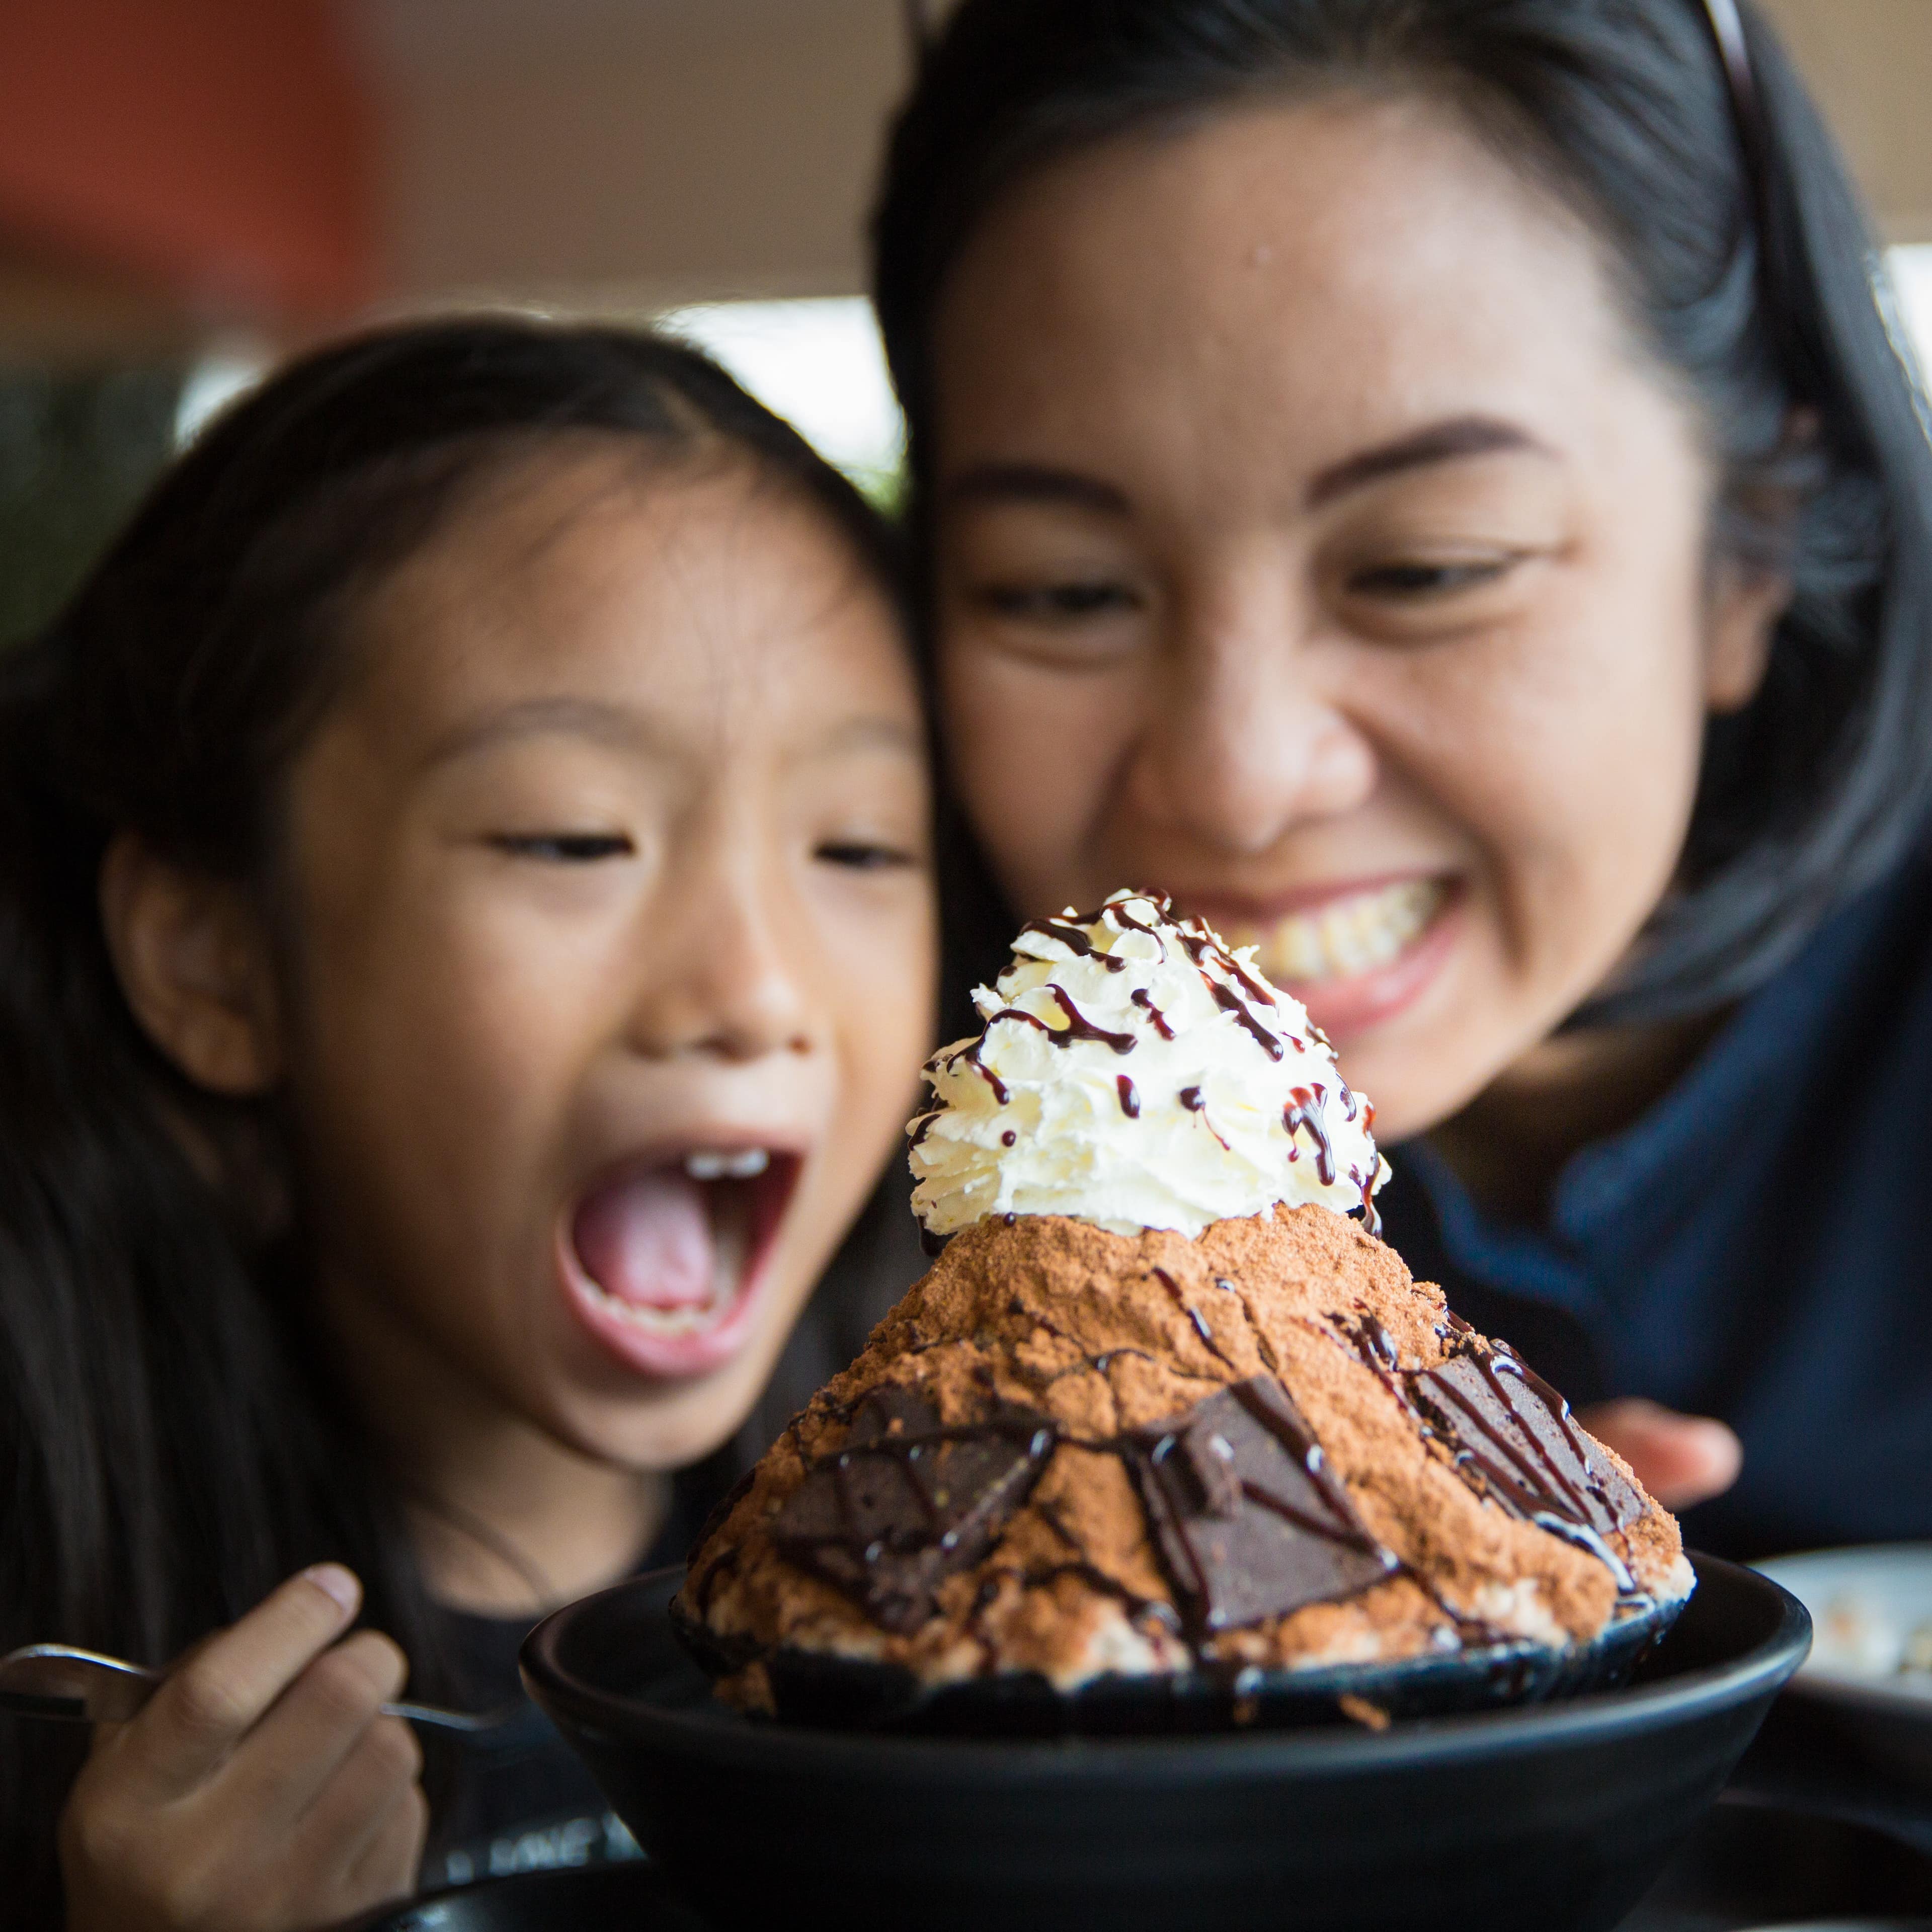 Mother and daughter happily enjoy eating an ice cream dessert